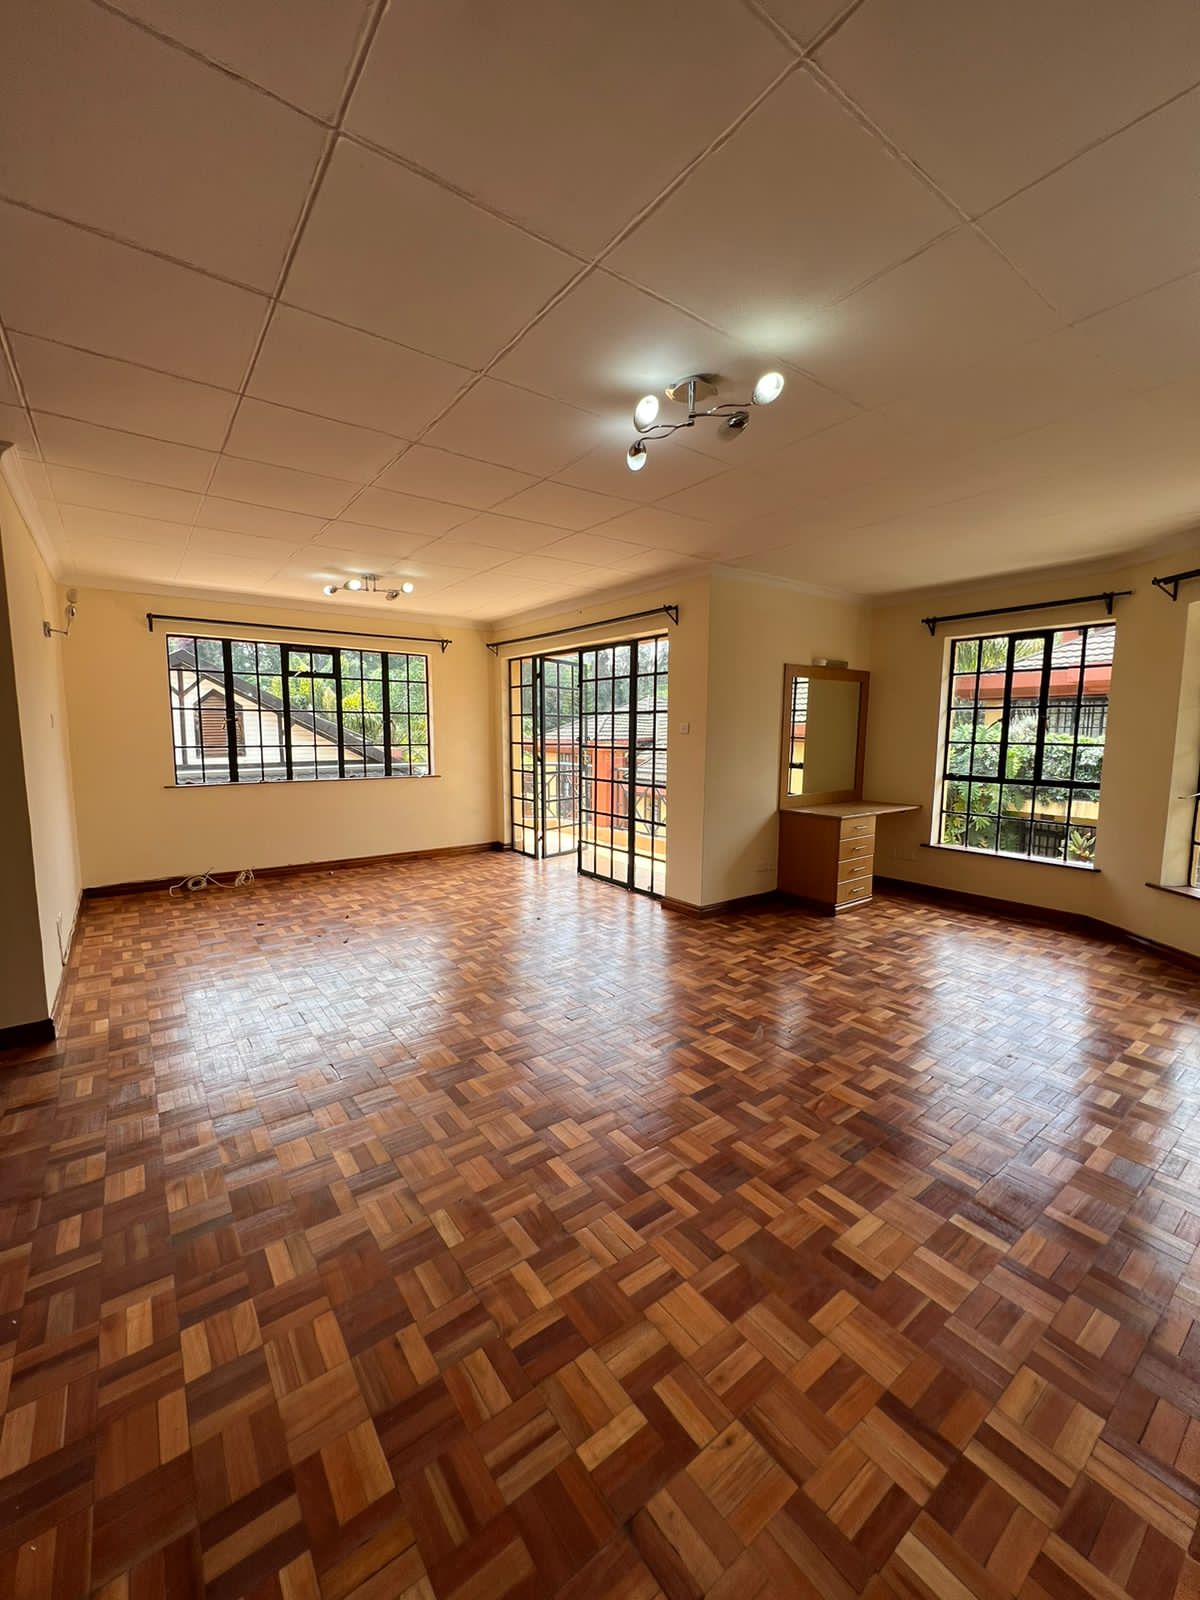 4 bedroom plus dsq townhouse to let located in the leafy suburb of kilimani, Nairobi. 2dsq available. In a gated community of 8 units. 220,000. Musilli Homes